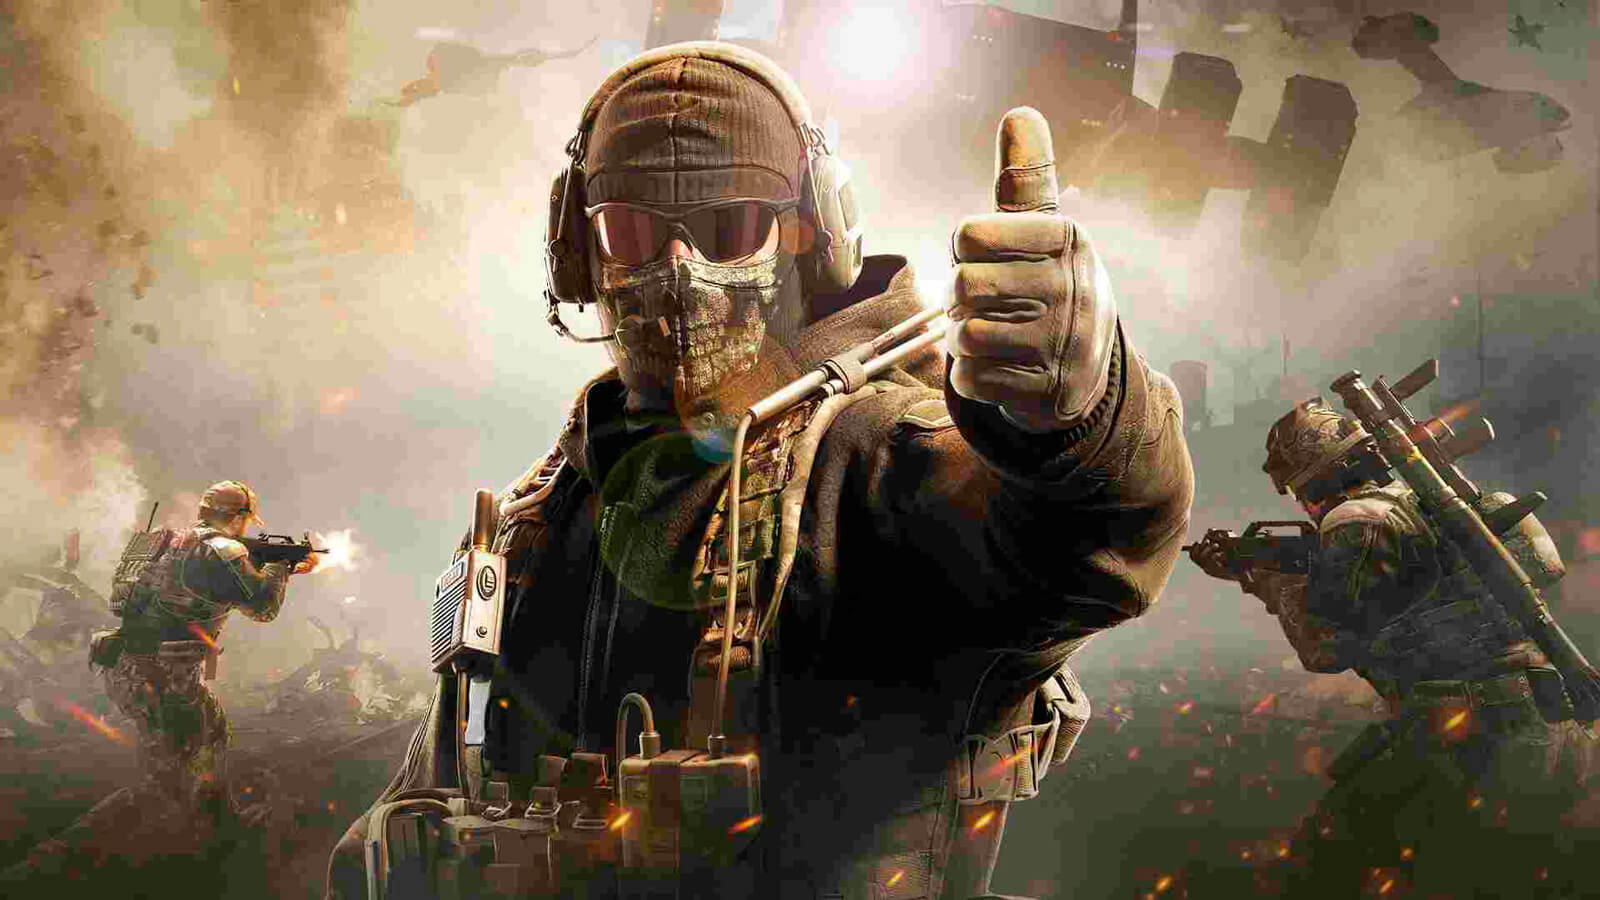 *NEW* 2 FREE REDEEM CODES FOR COD MOBILE!  Redemption Center Codes cod  mobile 